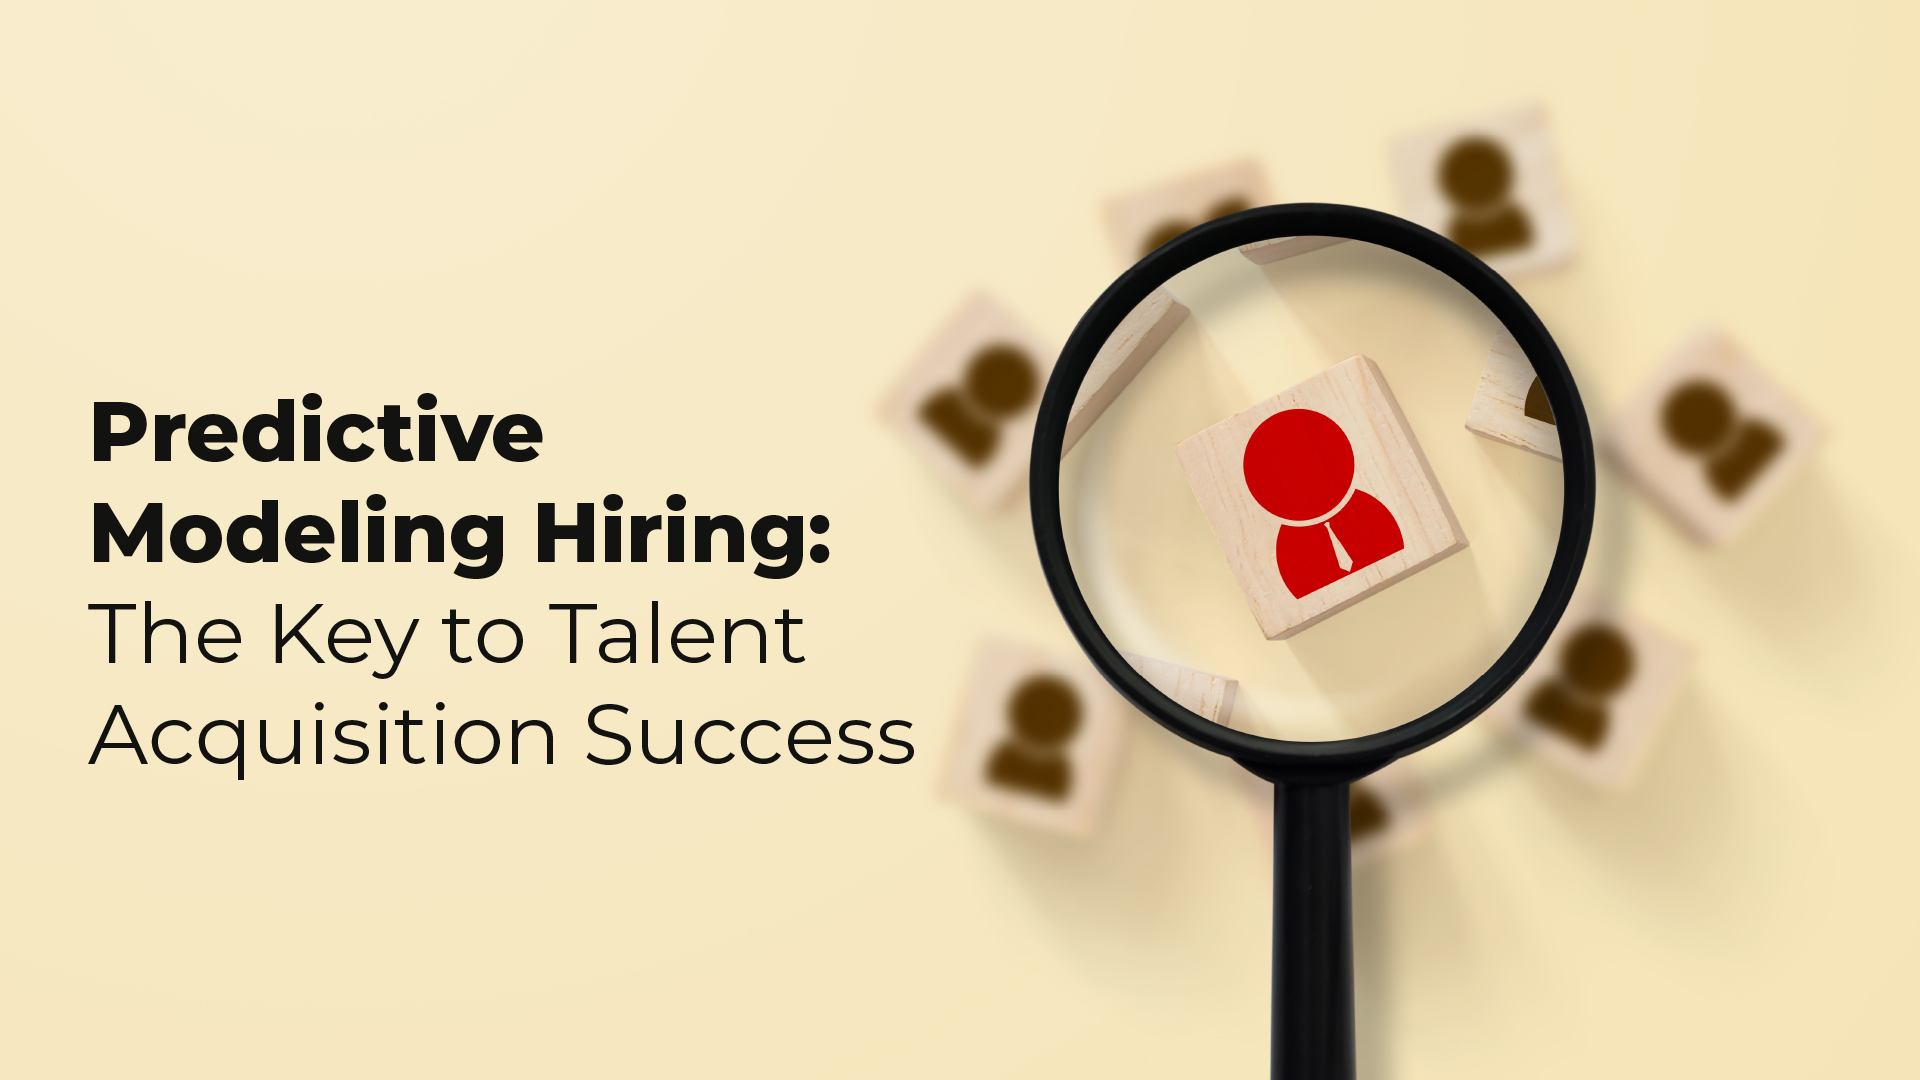 Predictive Modeling Hiring: The Key to Talent Acquisition Success